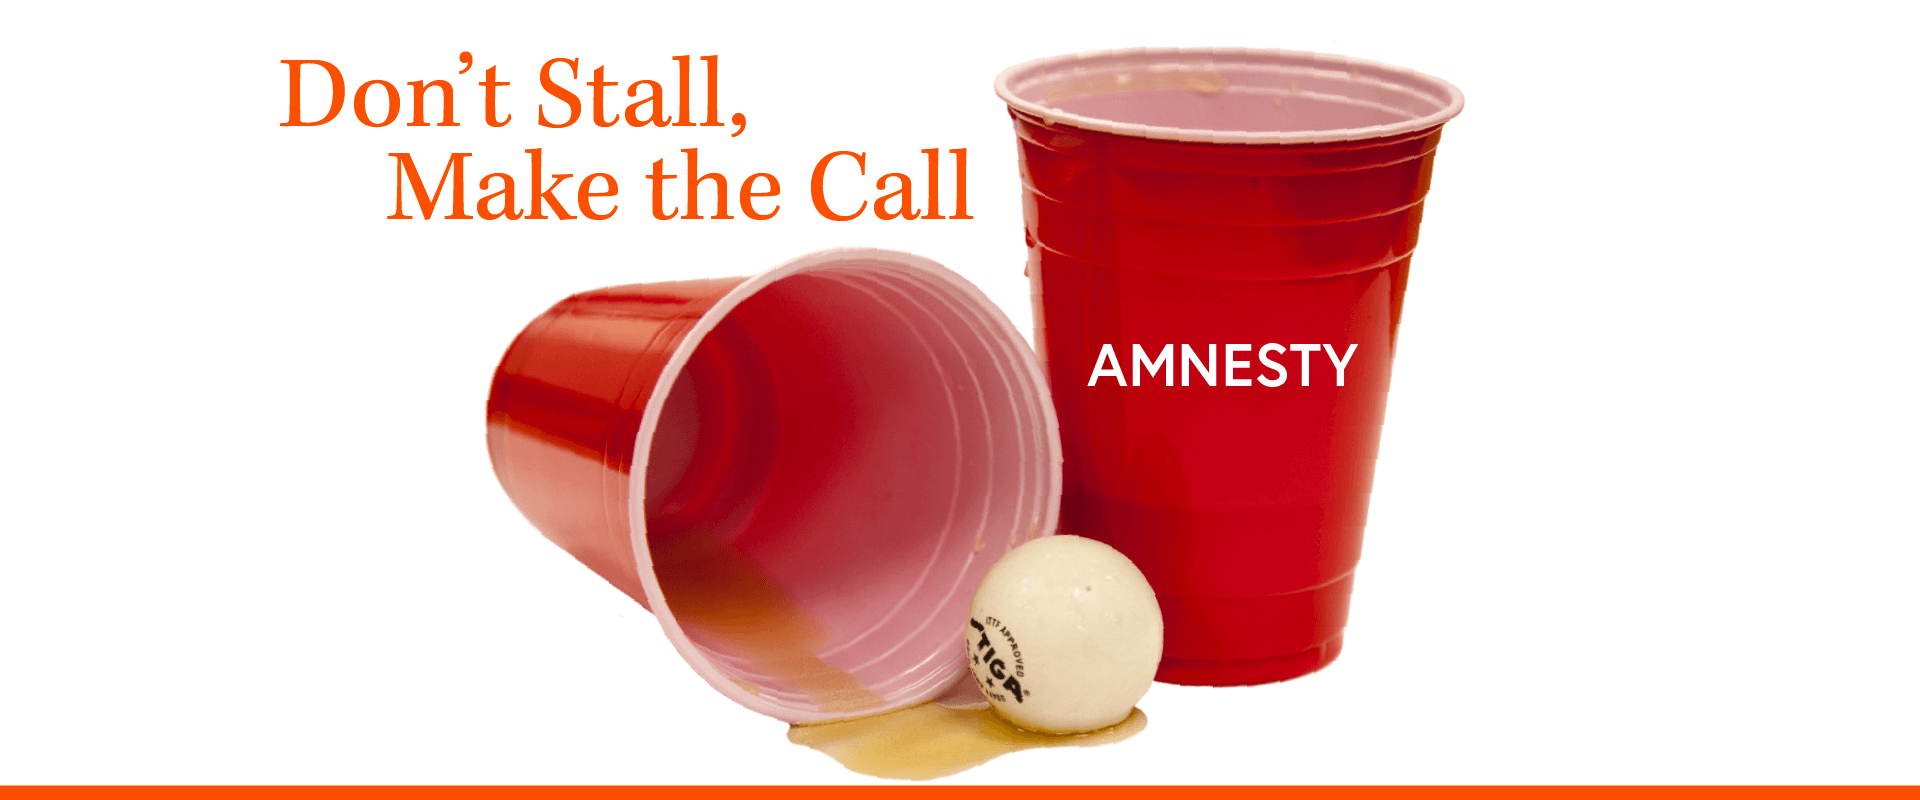 Know the Signs, make the call, Medical Amnesty +